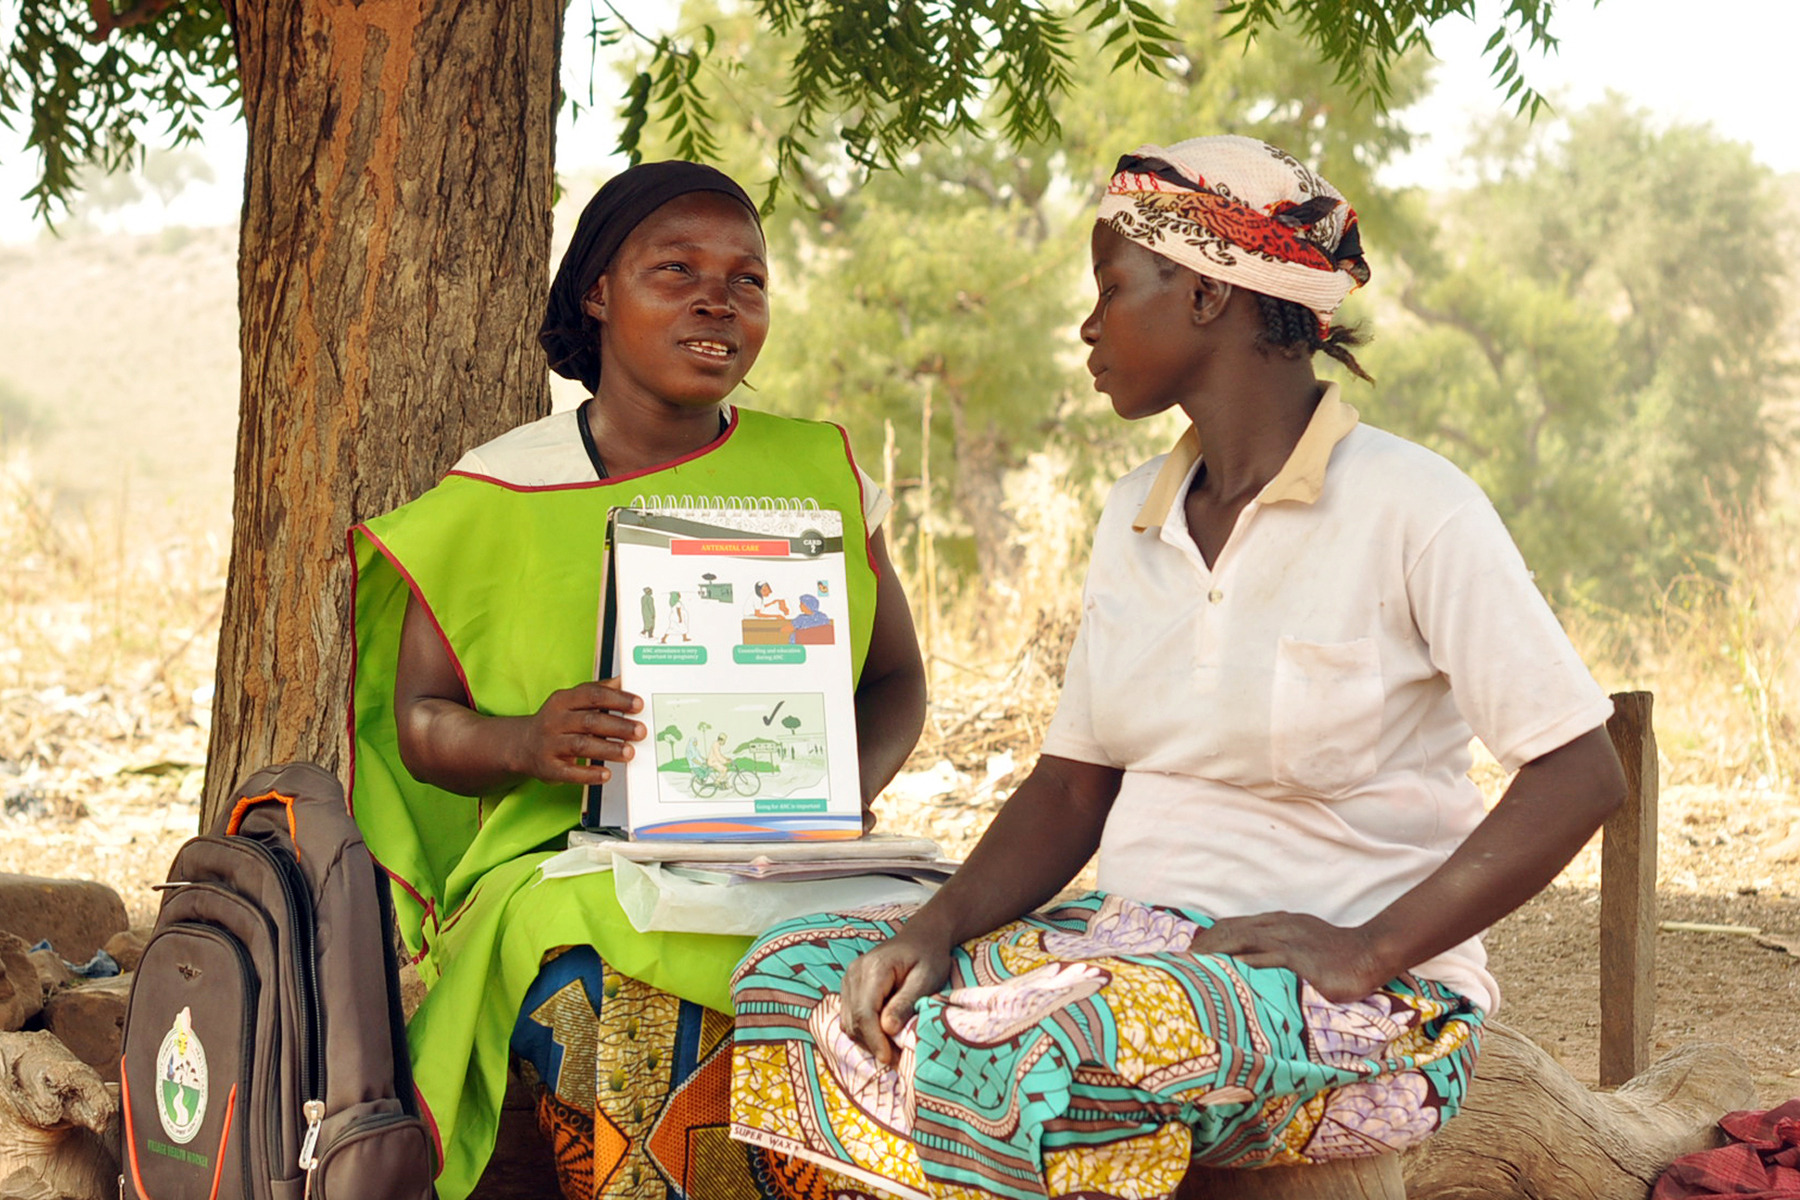 A village health worker shares information with a woman.